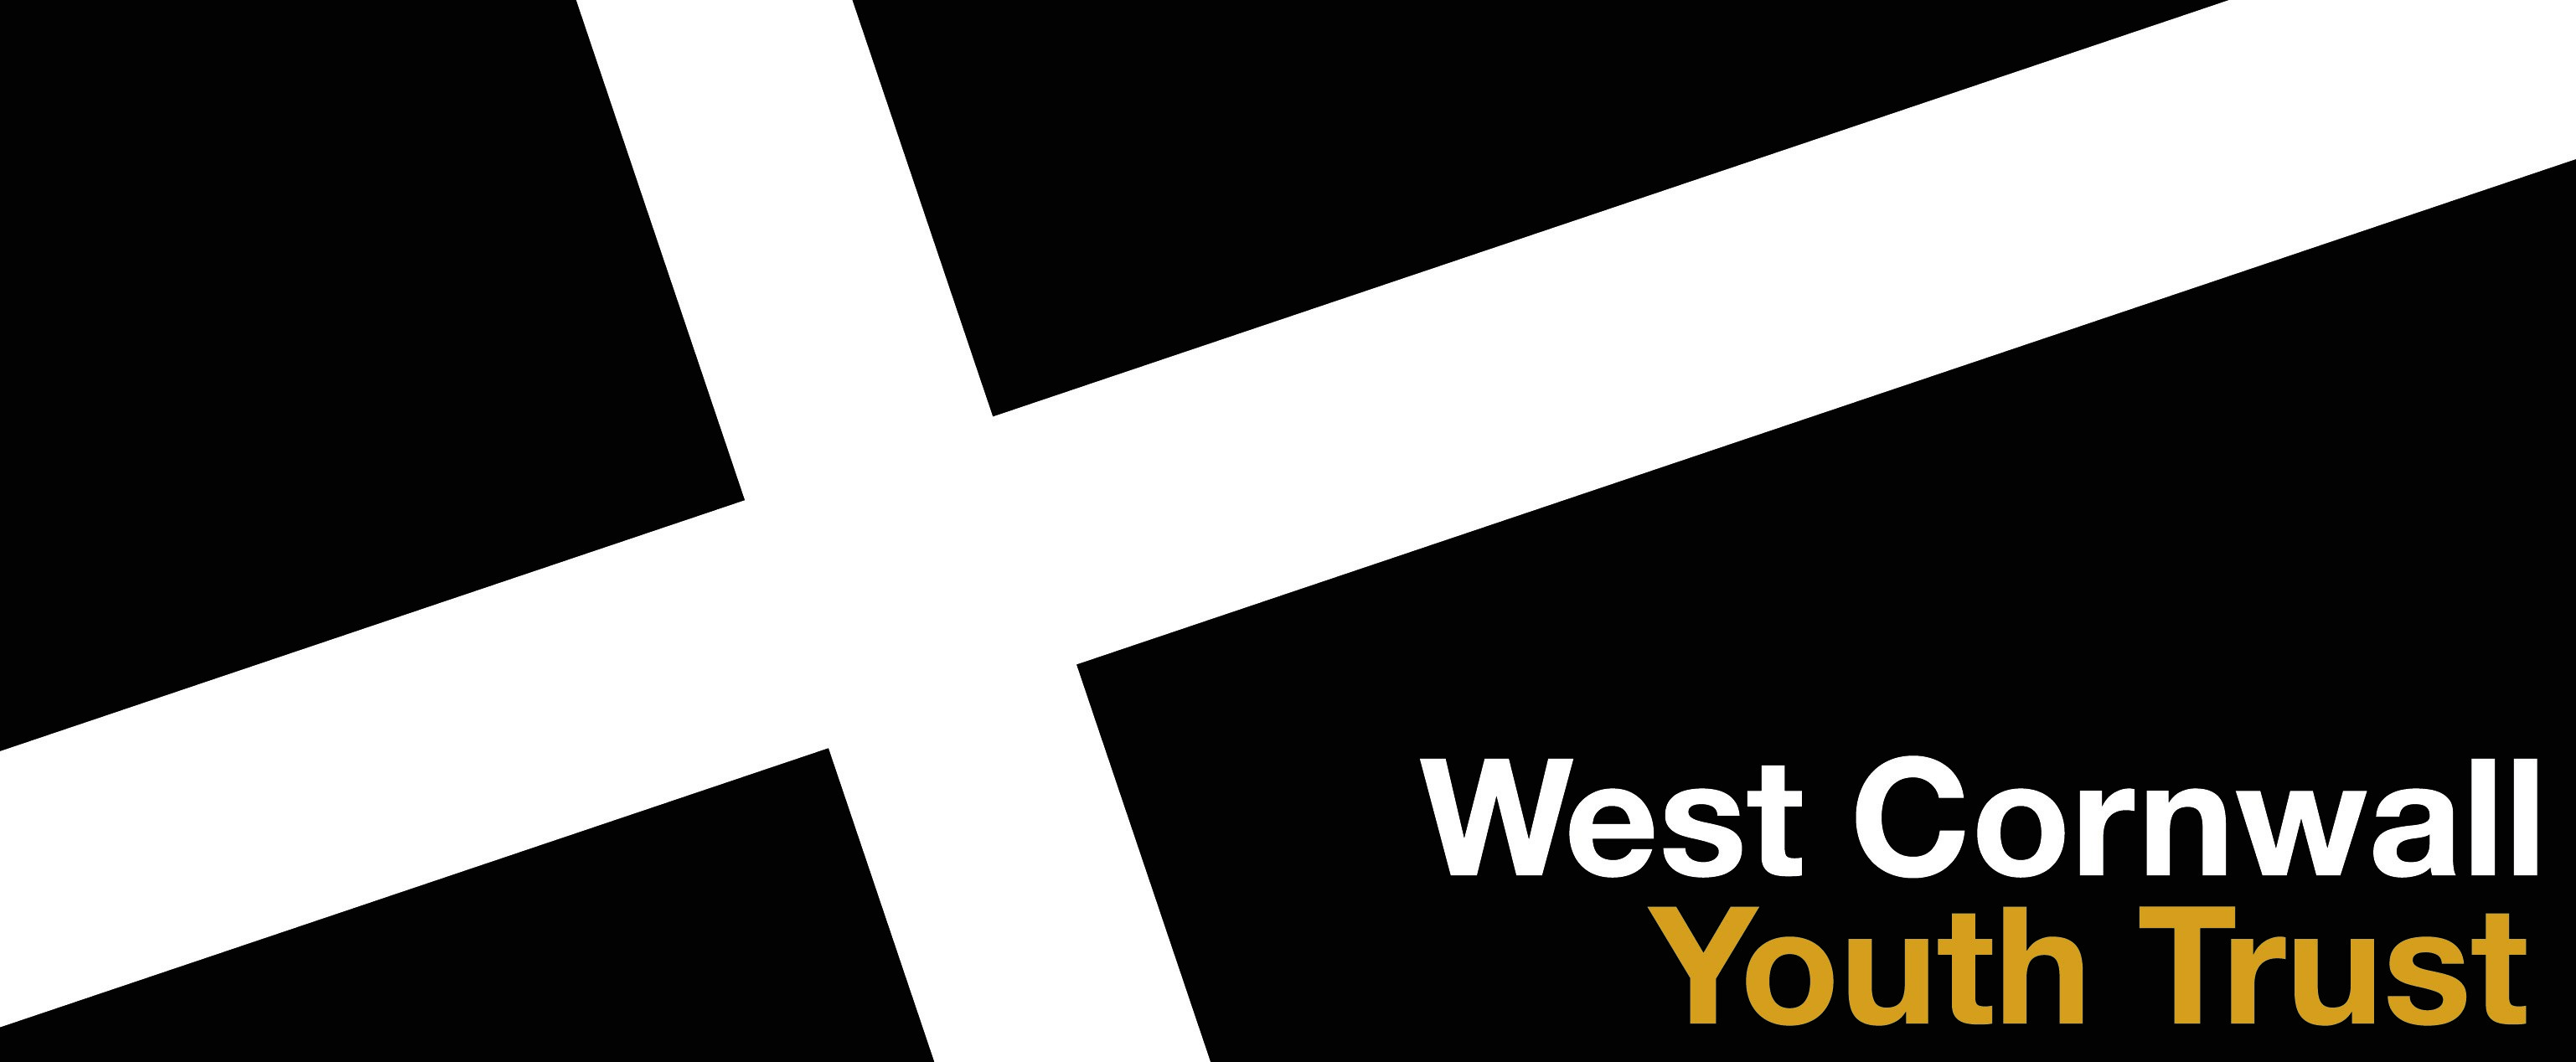 West Cornwall Youth Trust